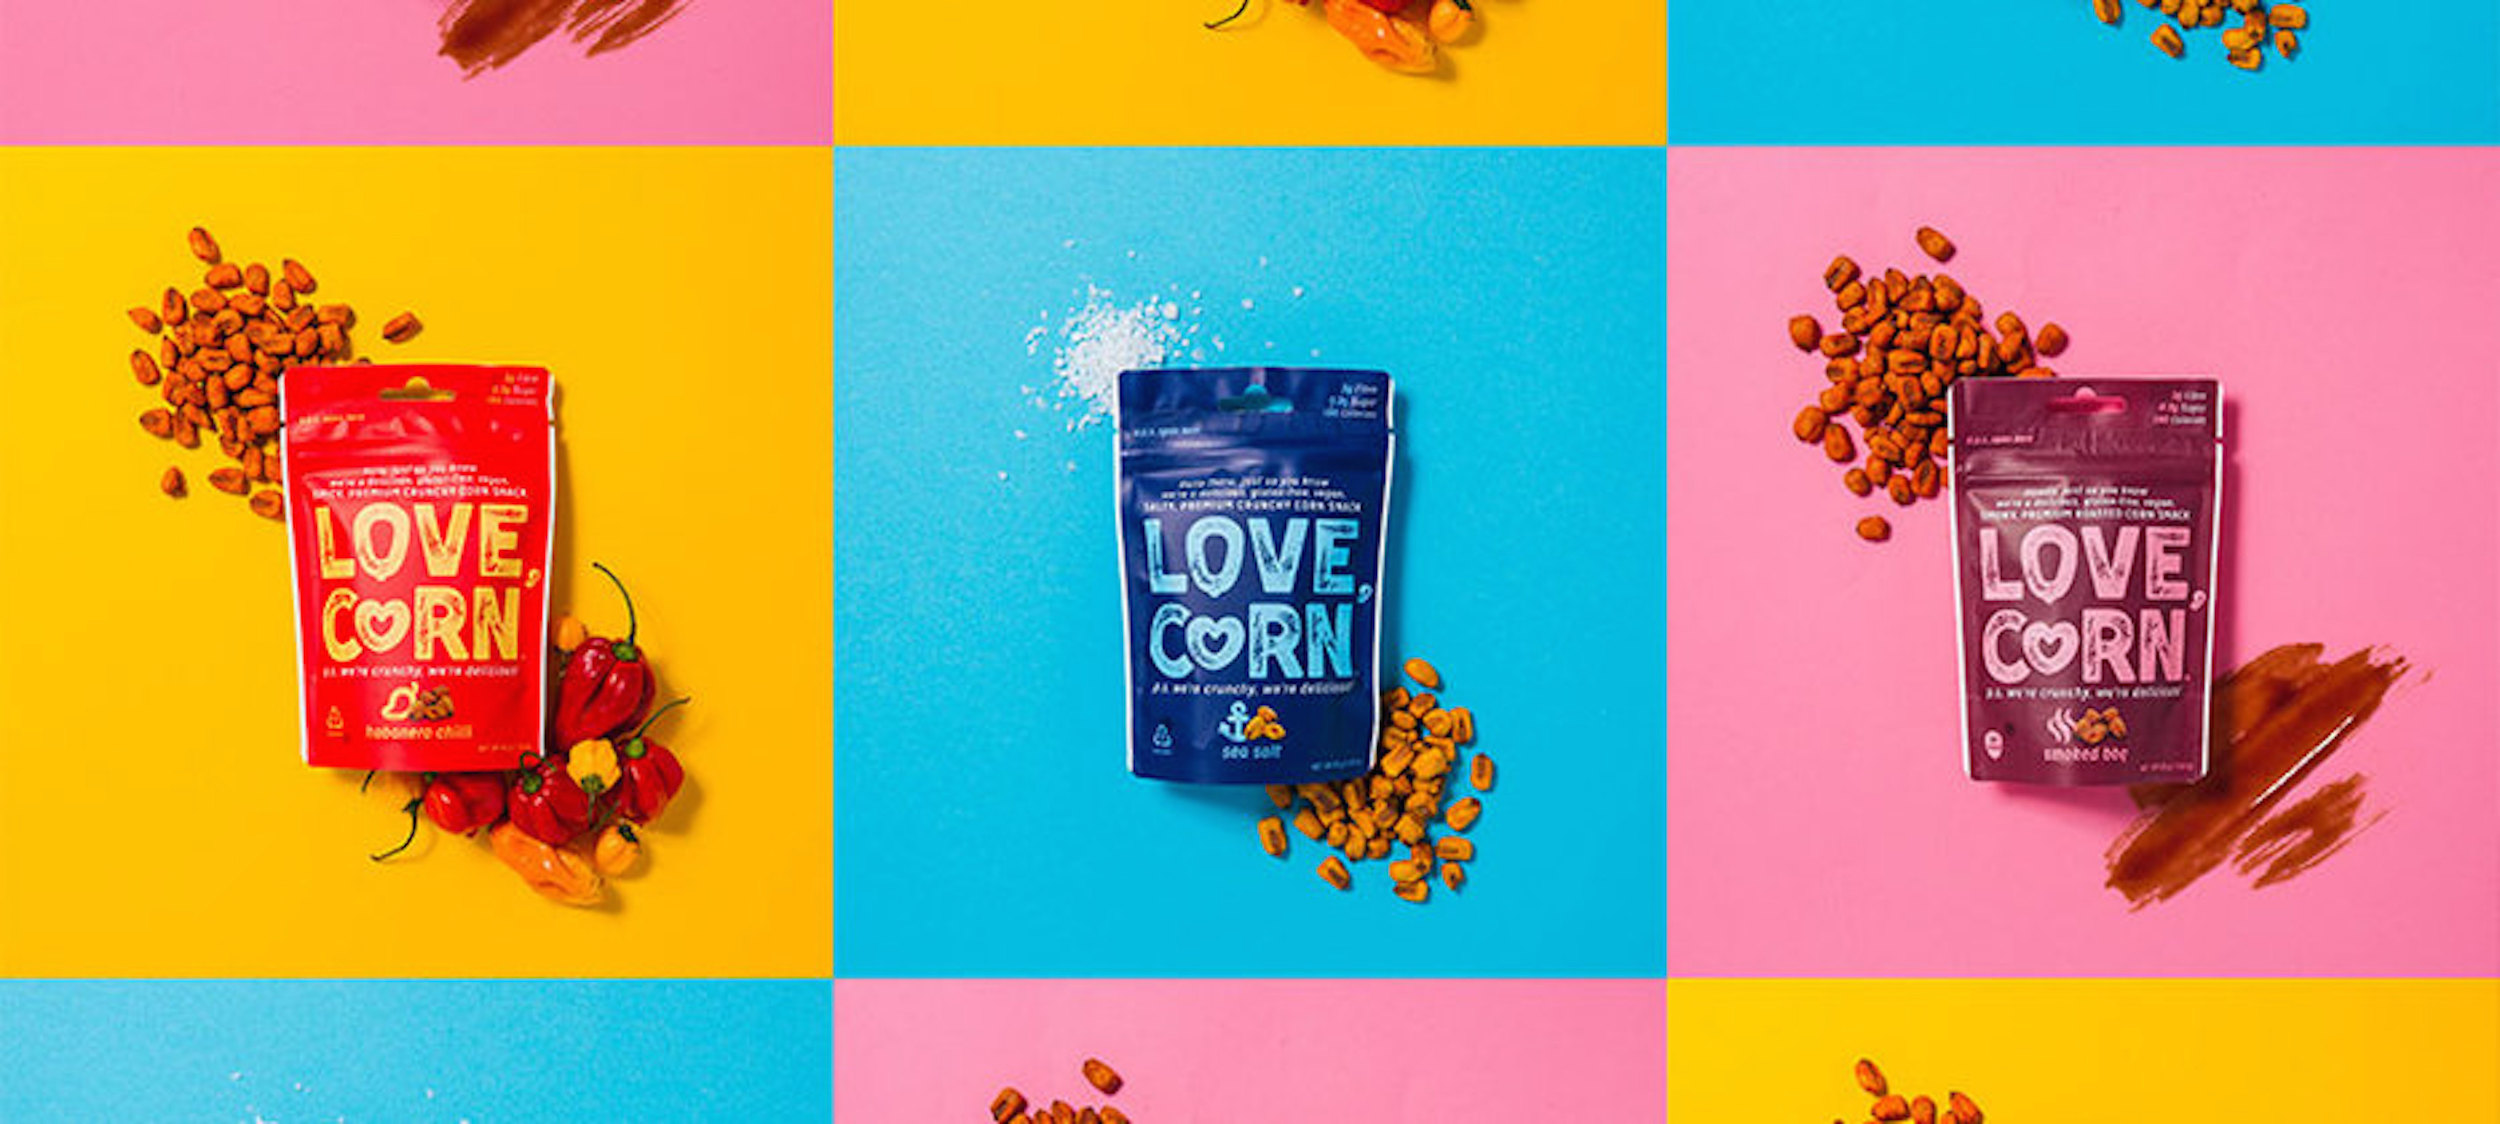 LOVE CORN is Our New Favorite Snack - Ever After in the Woods